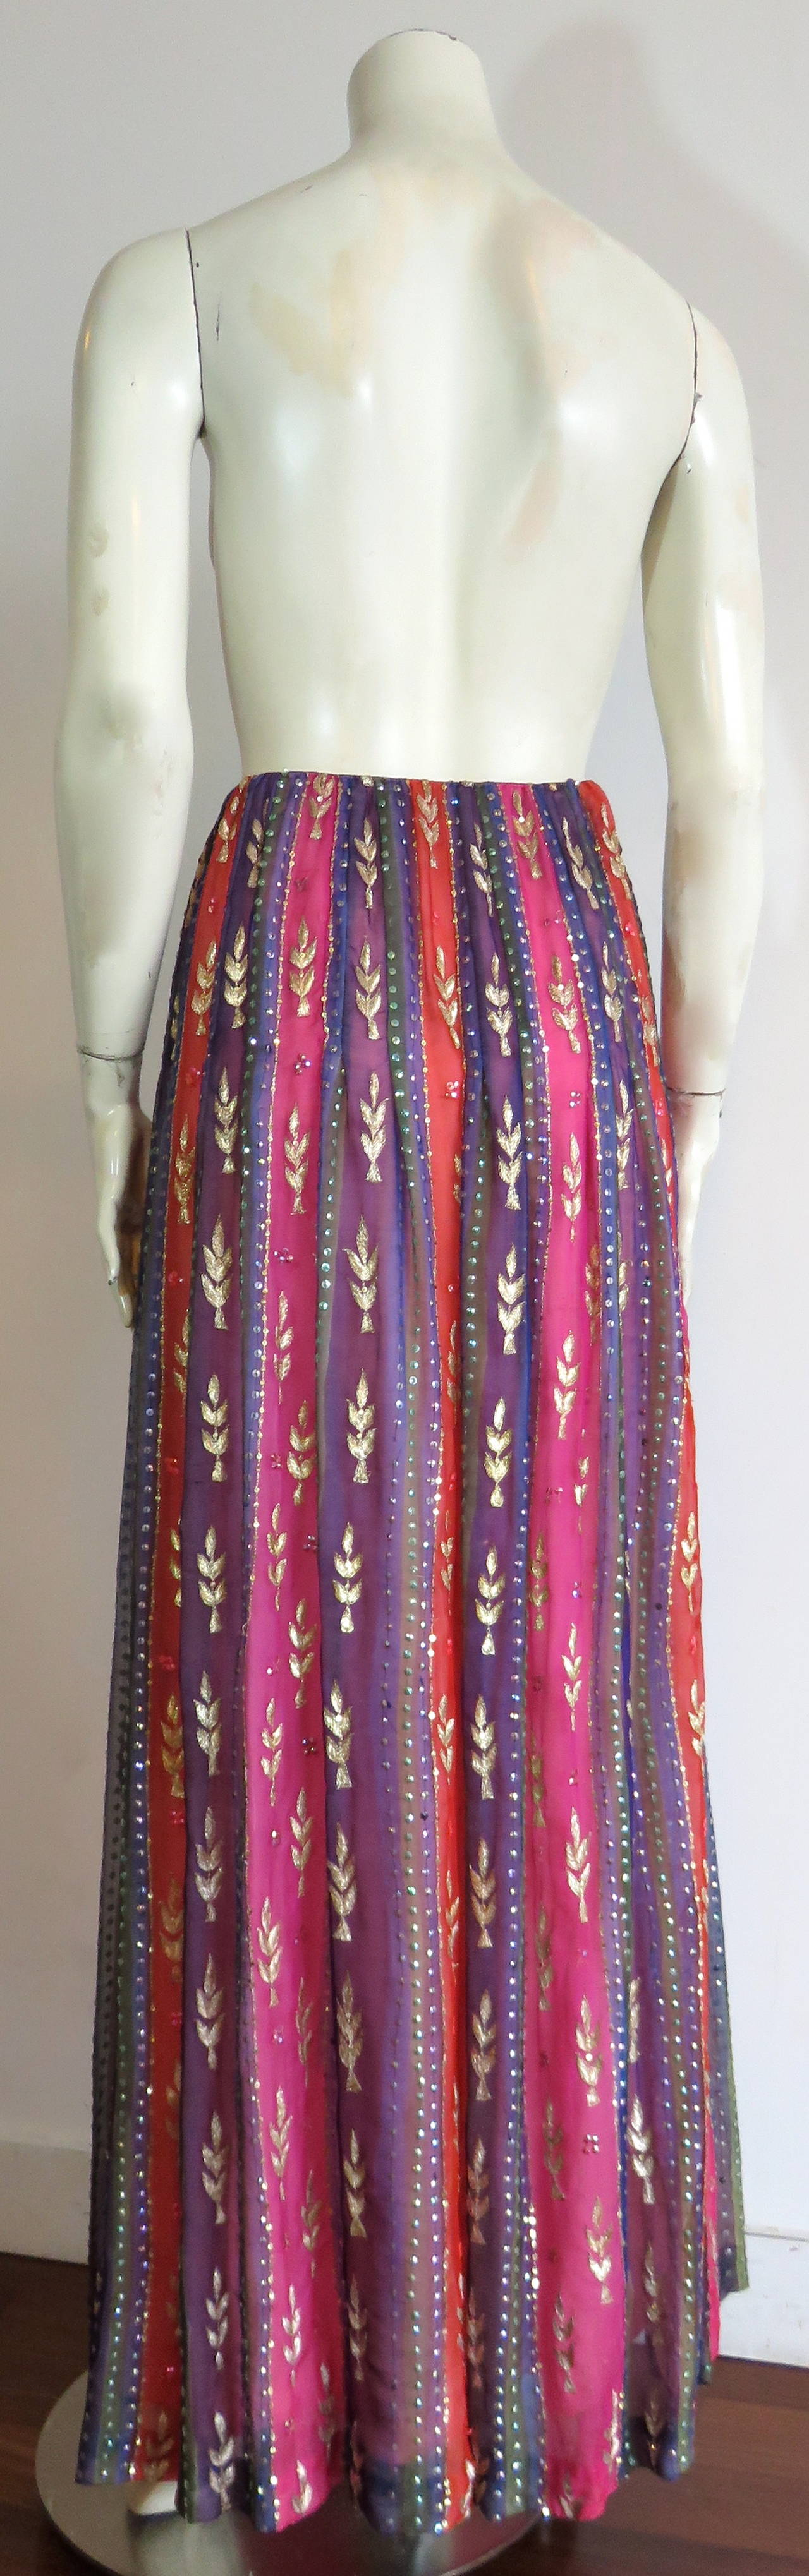 1970's GIVENCHY Haute Couture embellished silk skirt For Sale 1